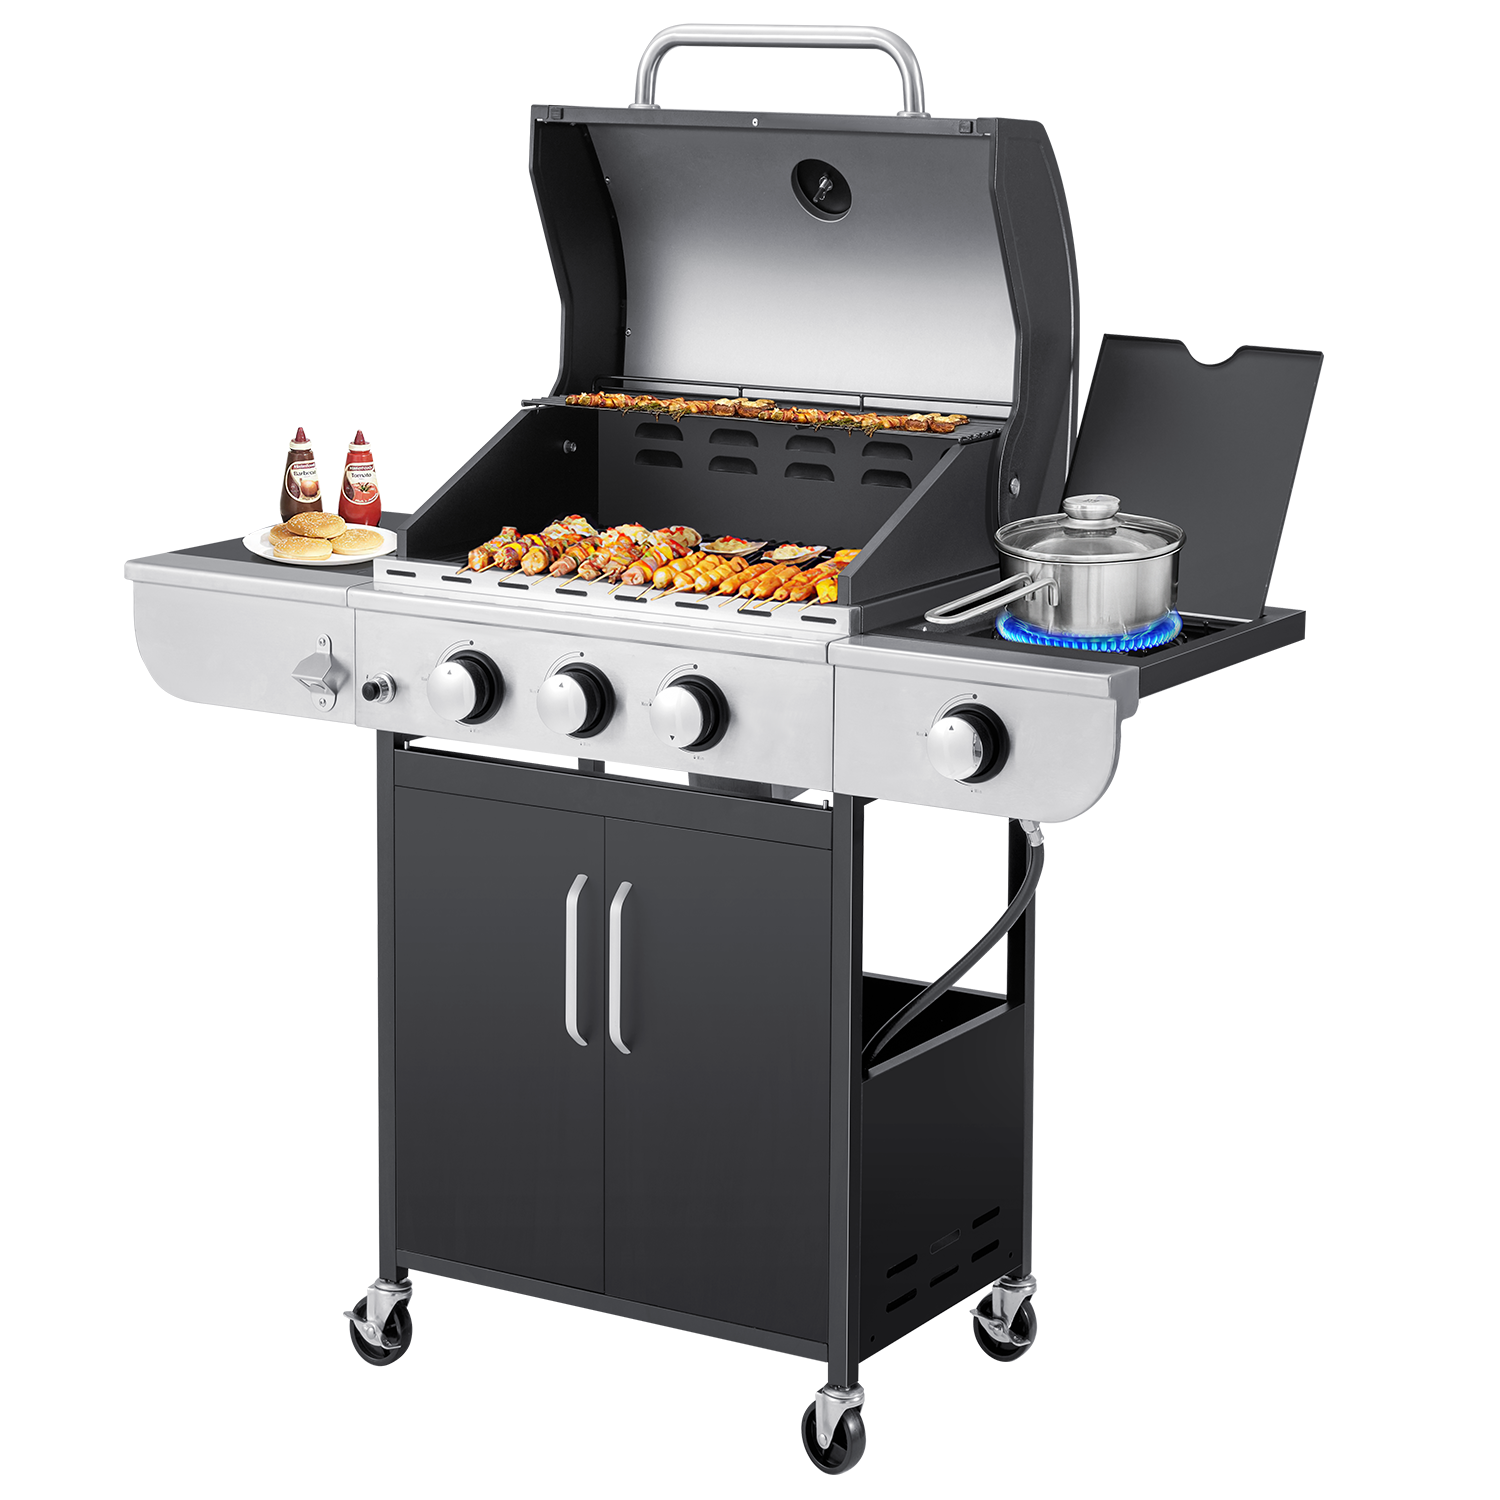 Yoleny 3 Burner BBQ Propane Gas Grill，24,000 BTU Stainless Steel with Stove and Side Table - image 1 of 8